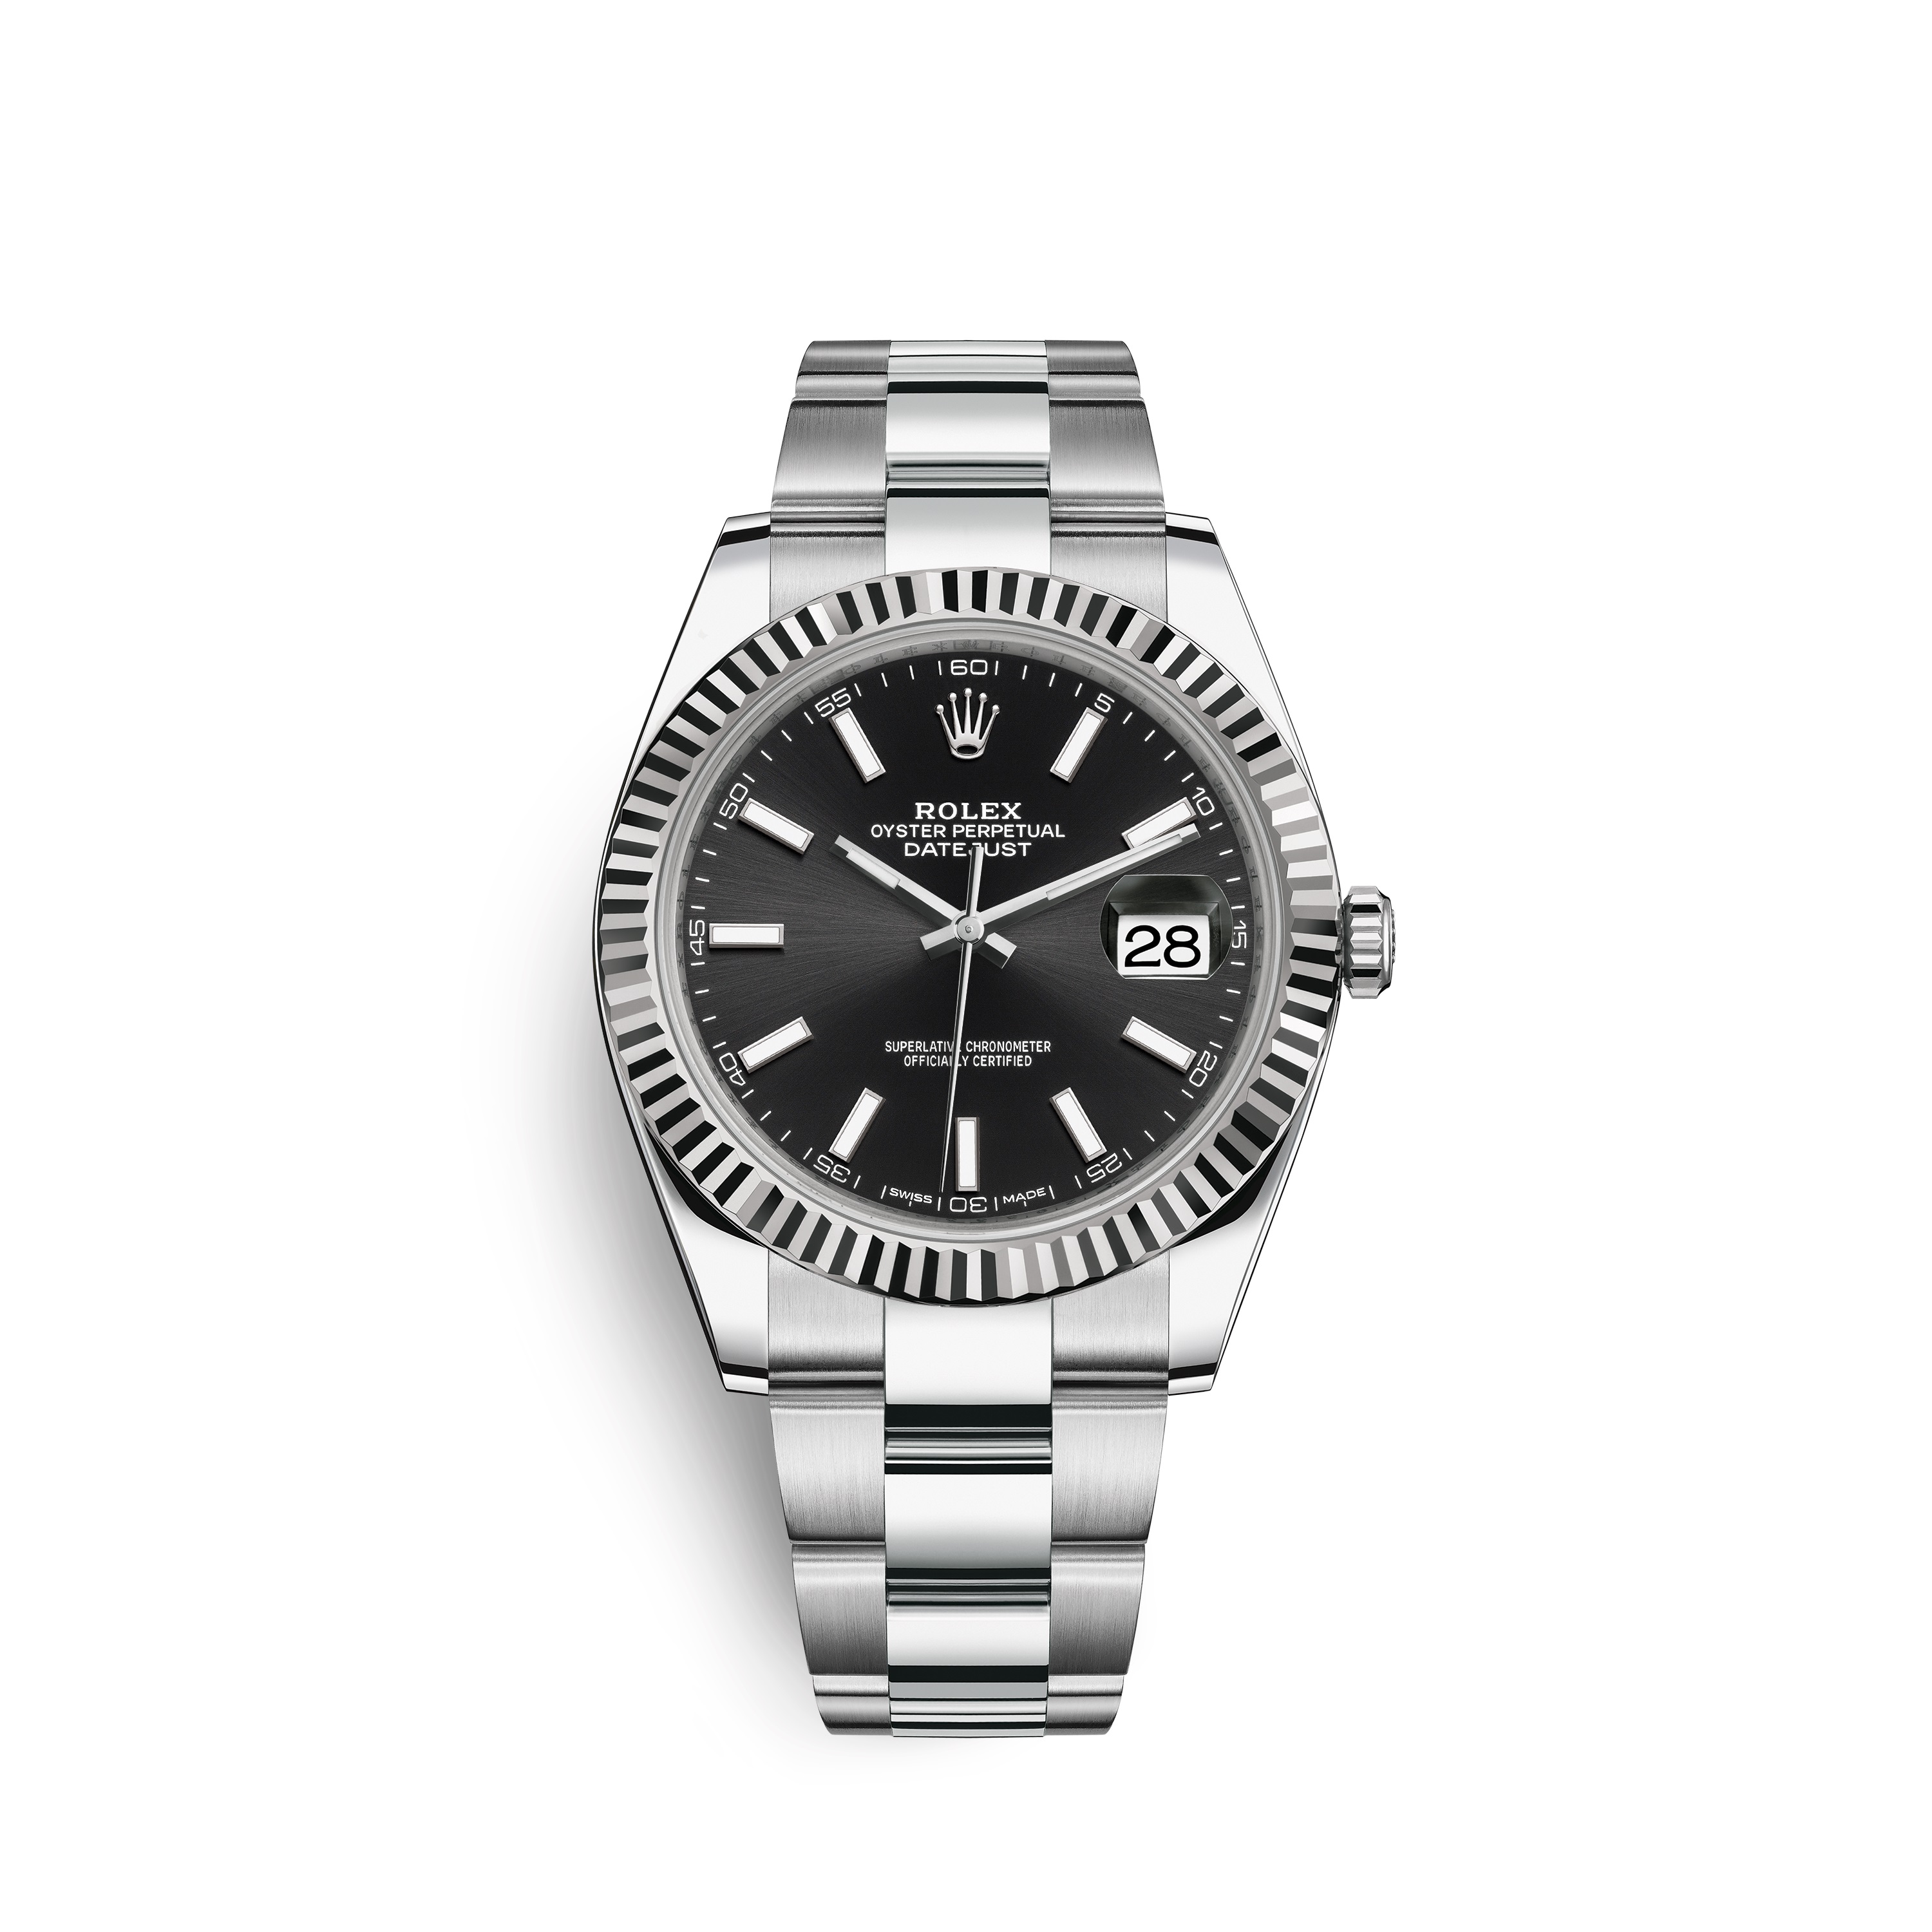 Datejust 41 126334 White Gold & Stainless Steel Watch (Black)